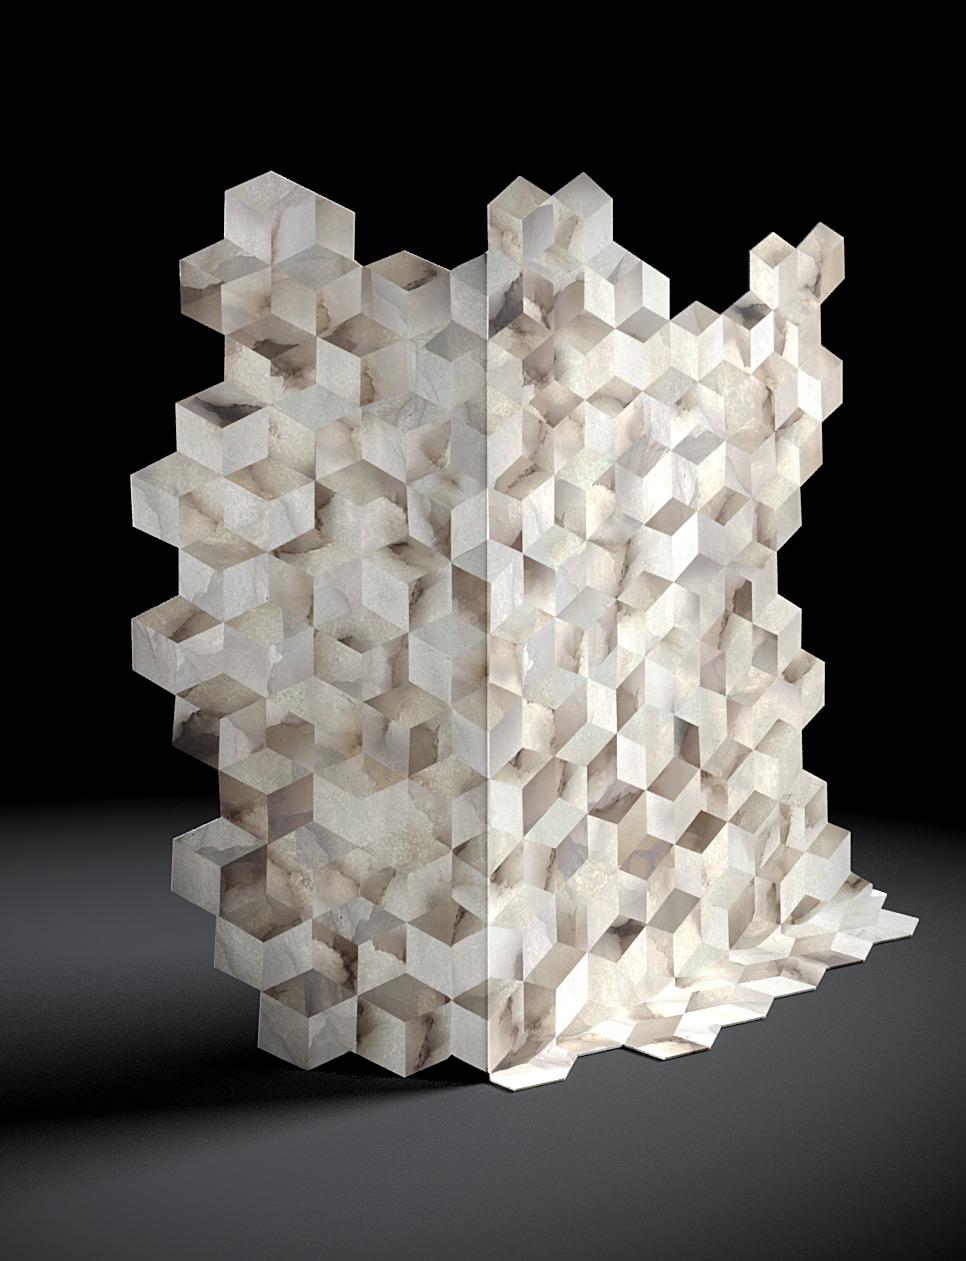 Alabaster Screen by Andrea Giomi
Dimensions: D 210 x W 100 x H 190 cm
Materials: Alabaster Volterra.
Also available in another marble version.

One of a kind inspired by the Basilica San Marco in Venice. Hexagonal shapes take shape giving a very